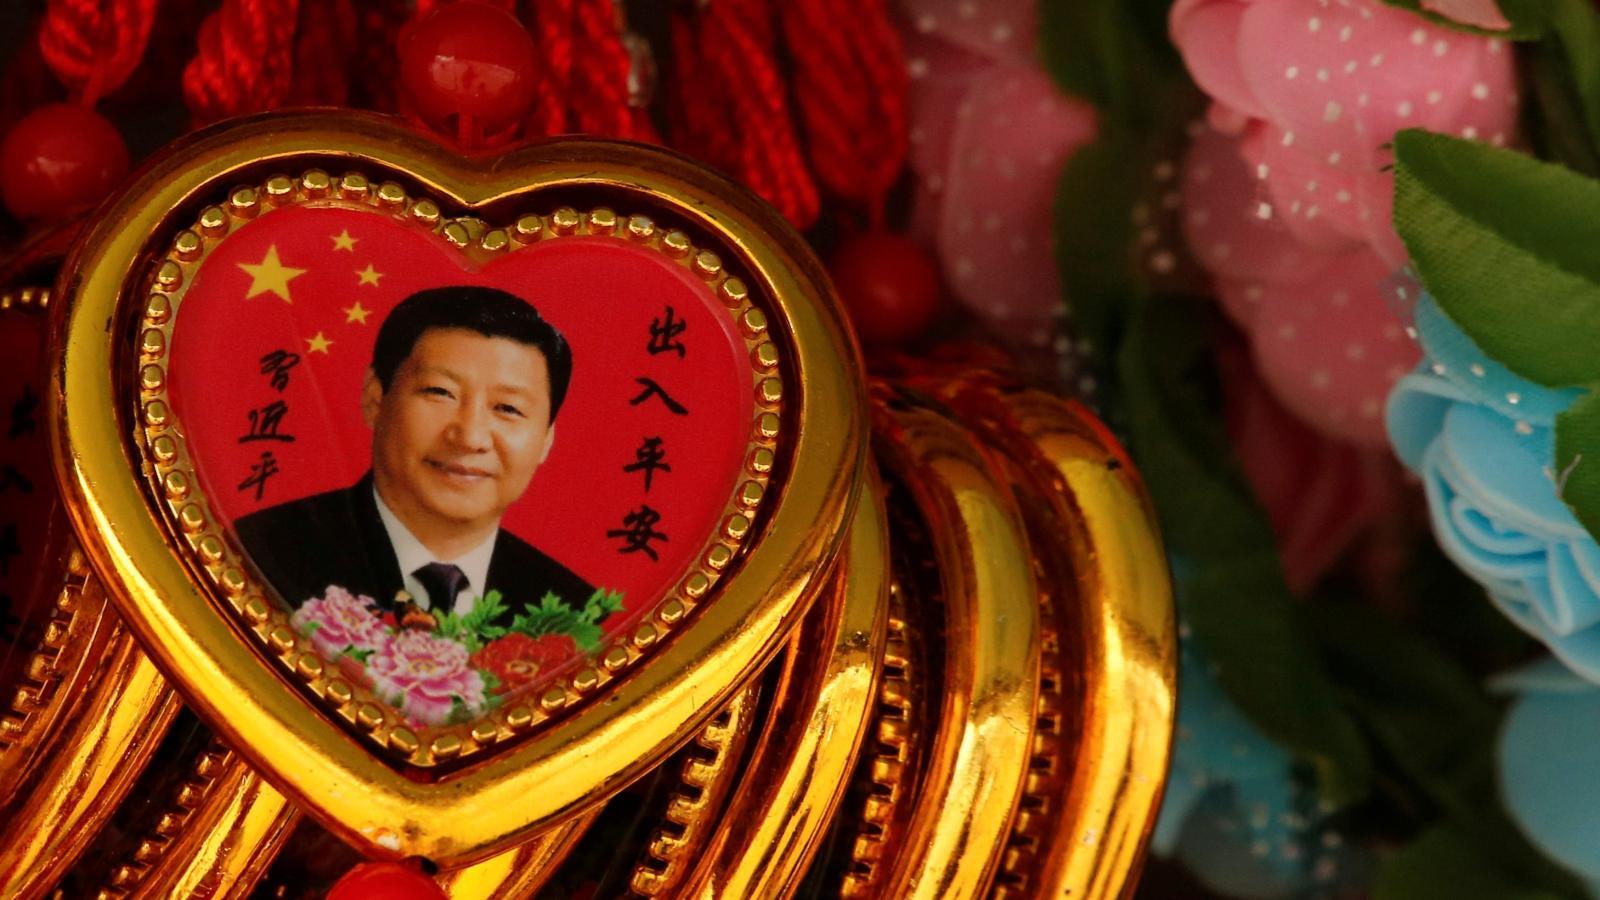 What Xi Jinping wants to do with his unrivaled power